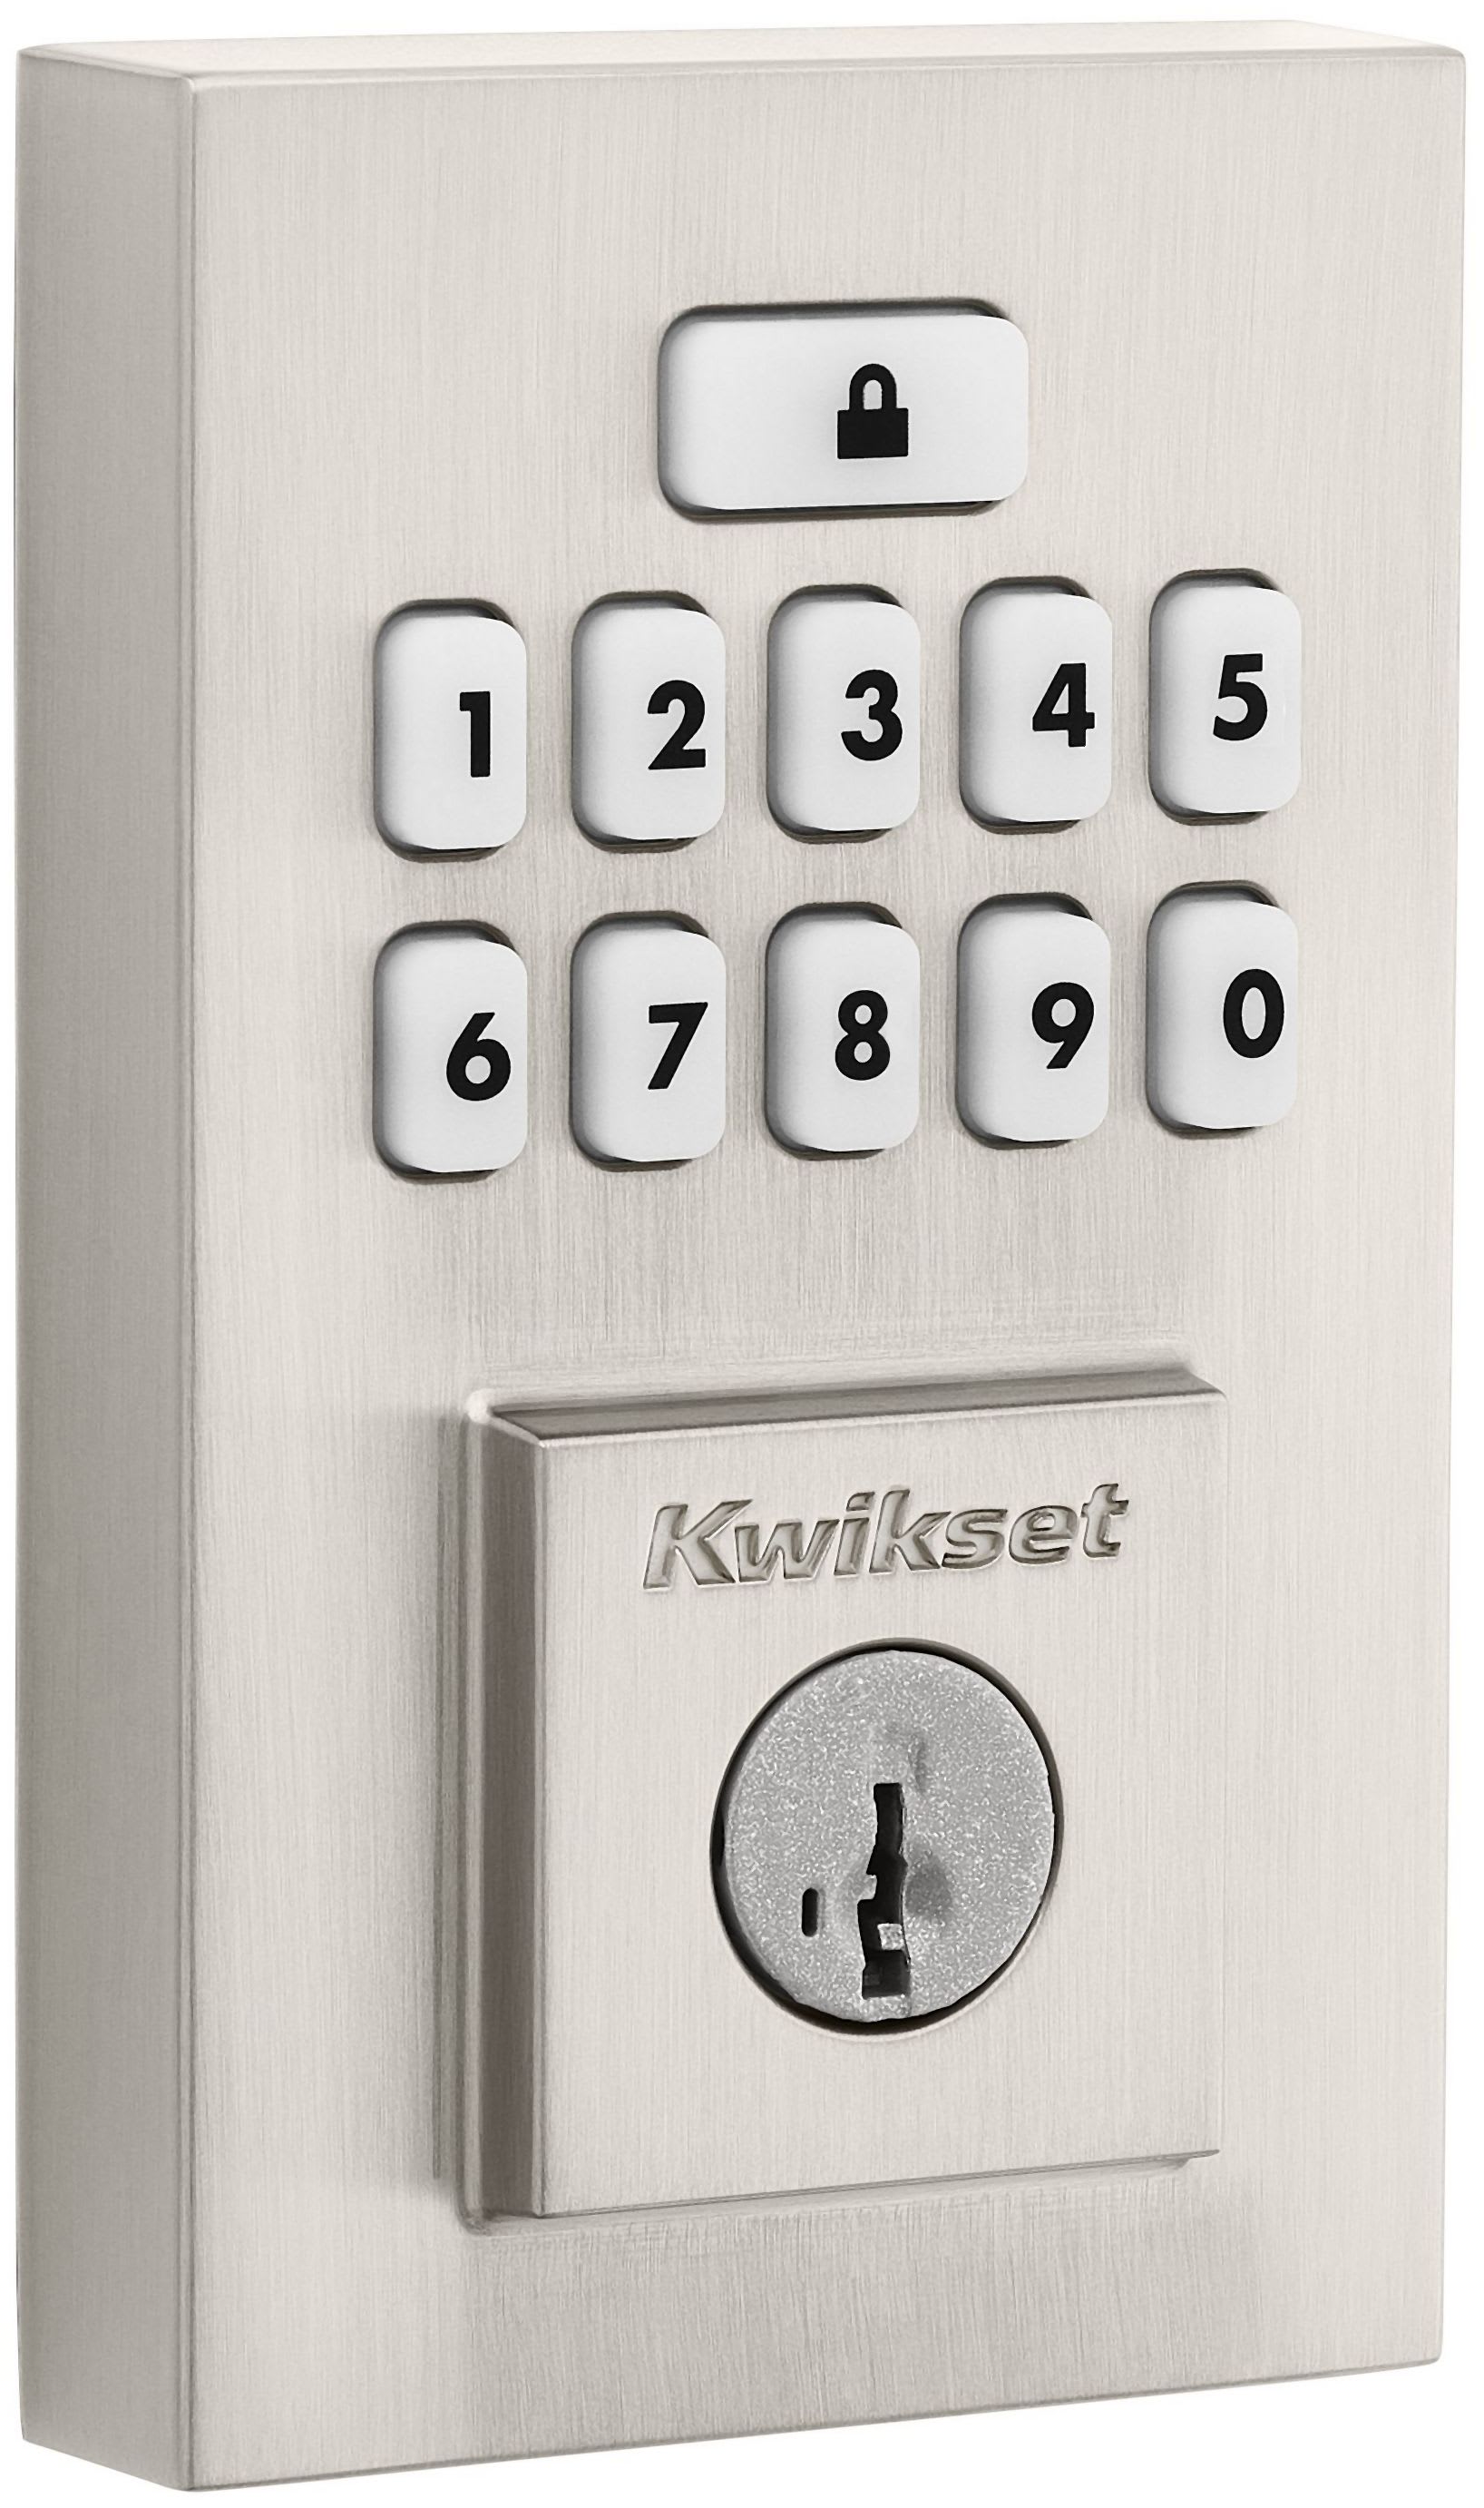 Kwikset 9260CNT-15S Satin Nickel SmartCode Deadbolts Touchpad Single  Cylinder Keyless Entry Deadbolt with UL Fire Rating and Smartkey Technology 